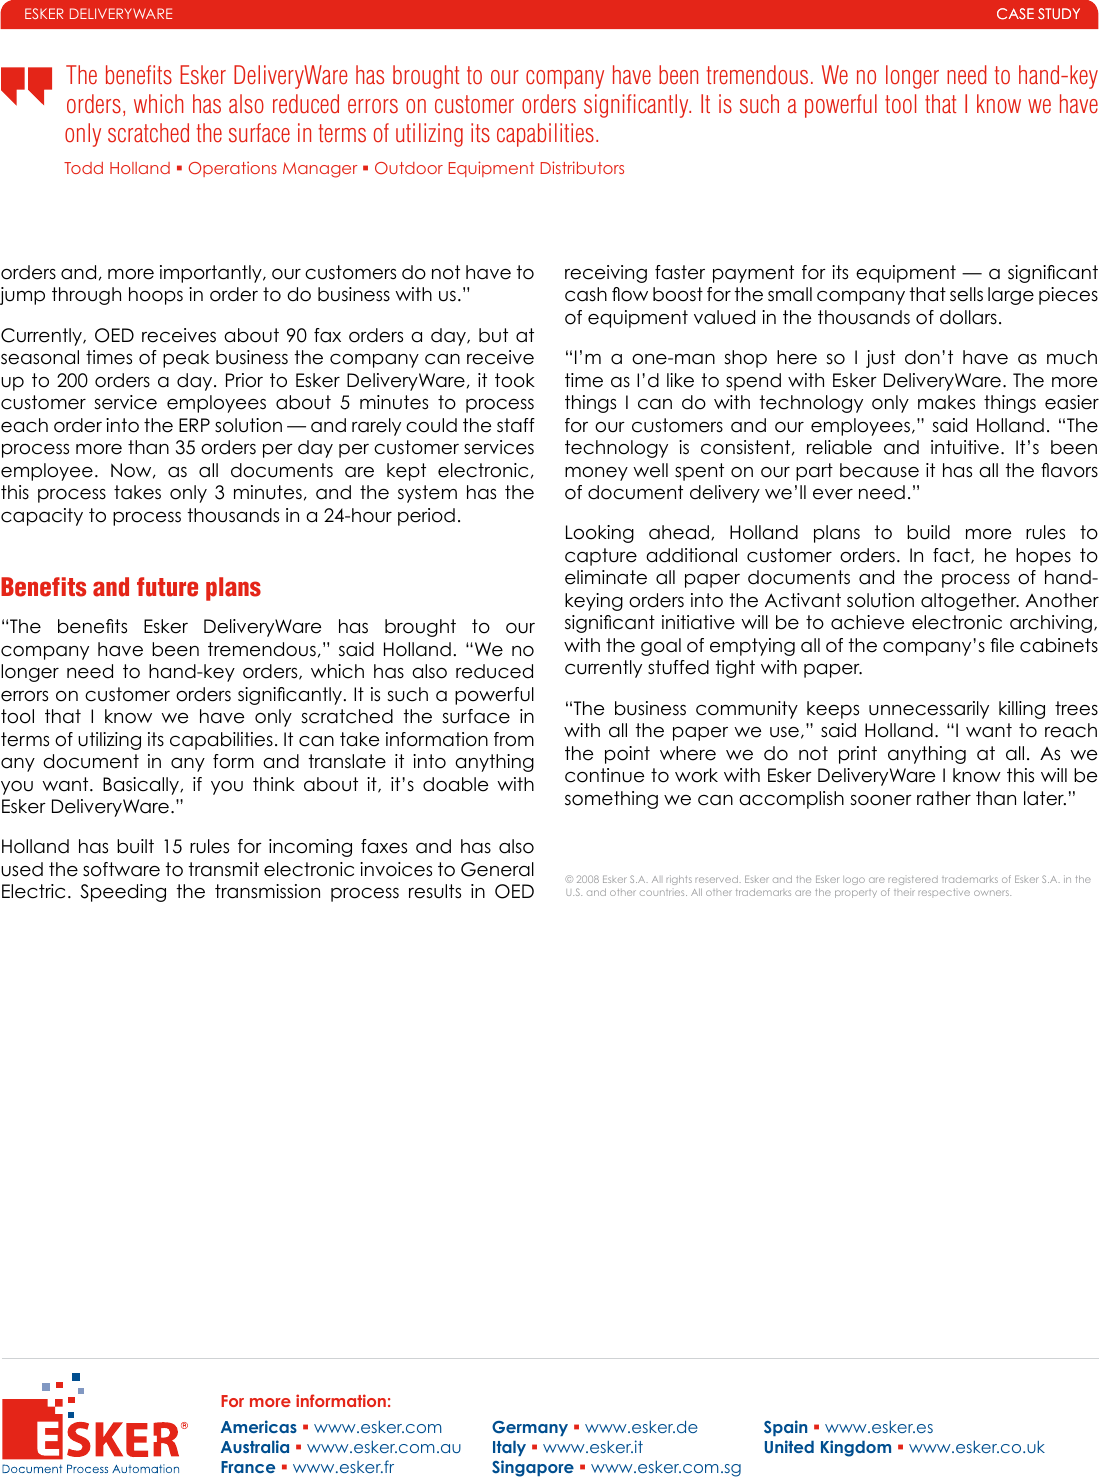 Page 2 of 2 - !! 059-esker Deliveryware Case Study Oed-us